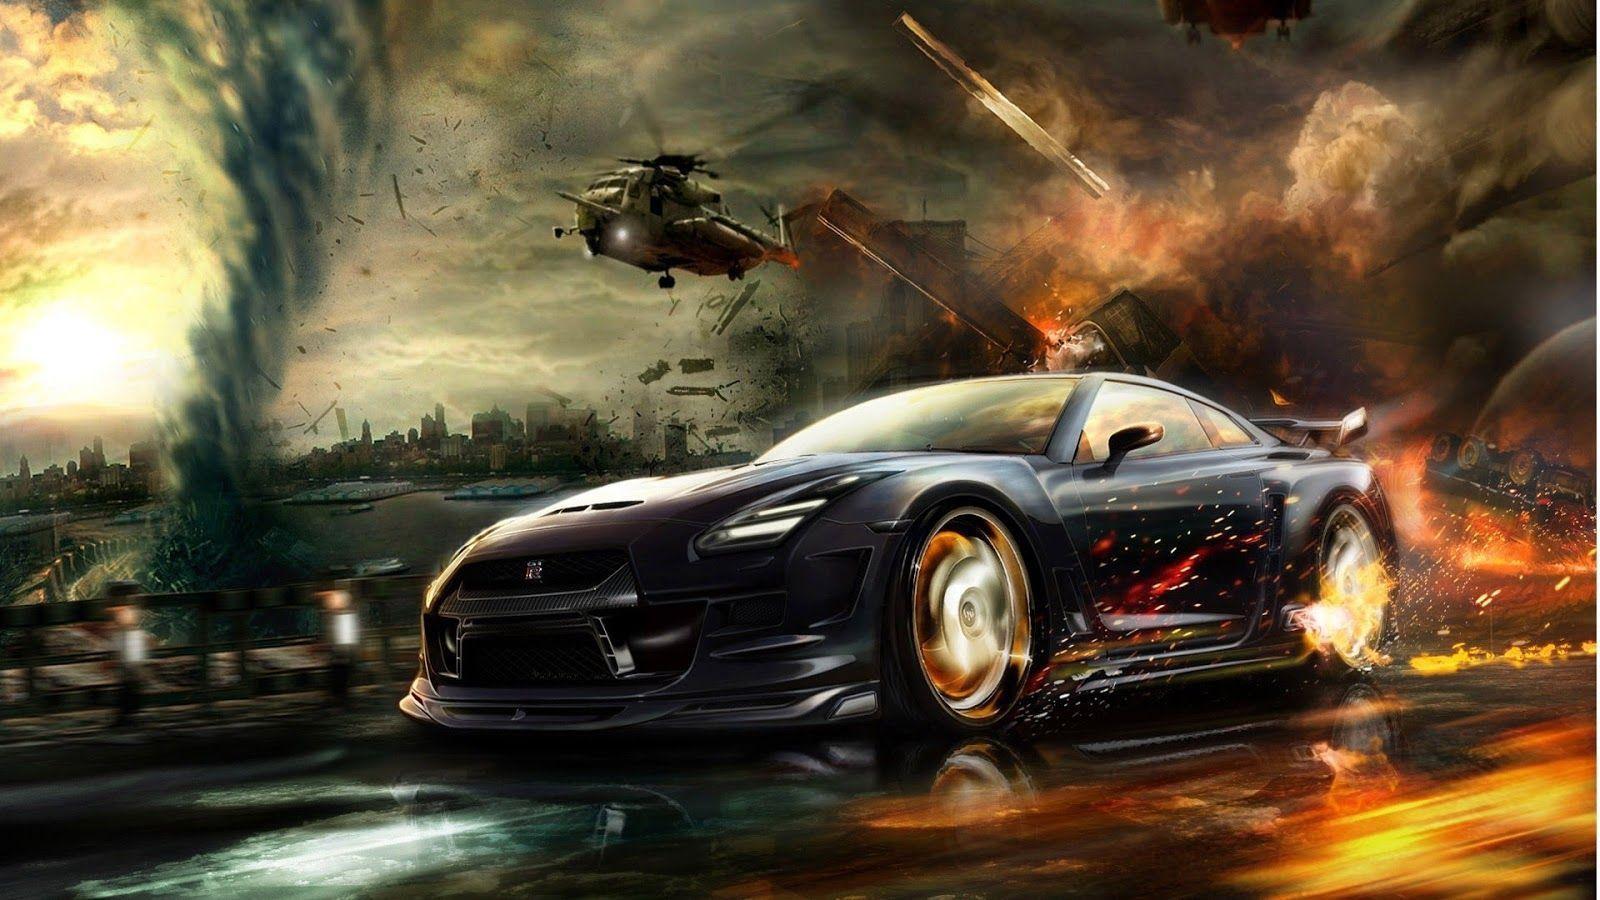 Cool cars and coolest cars wallpaper